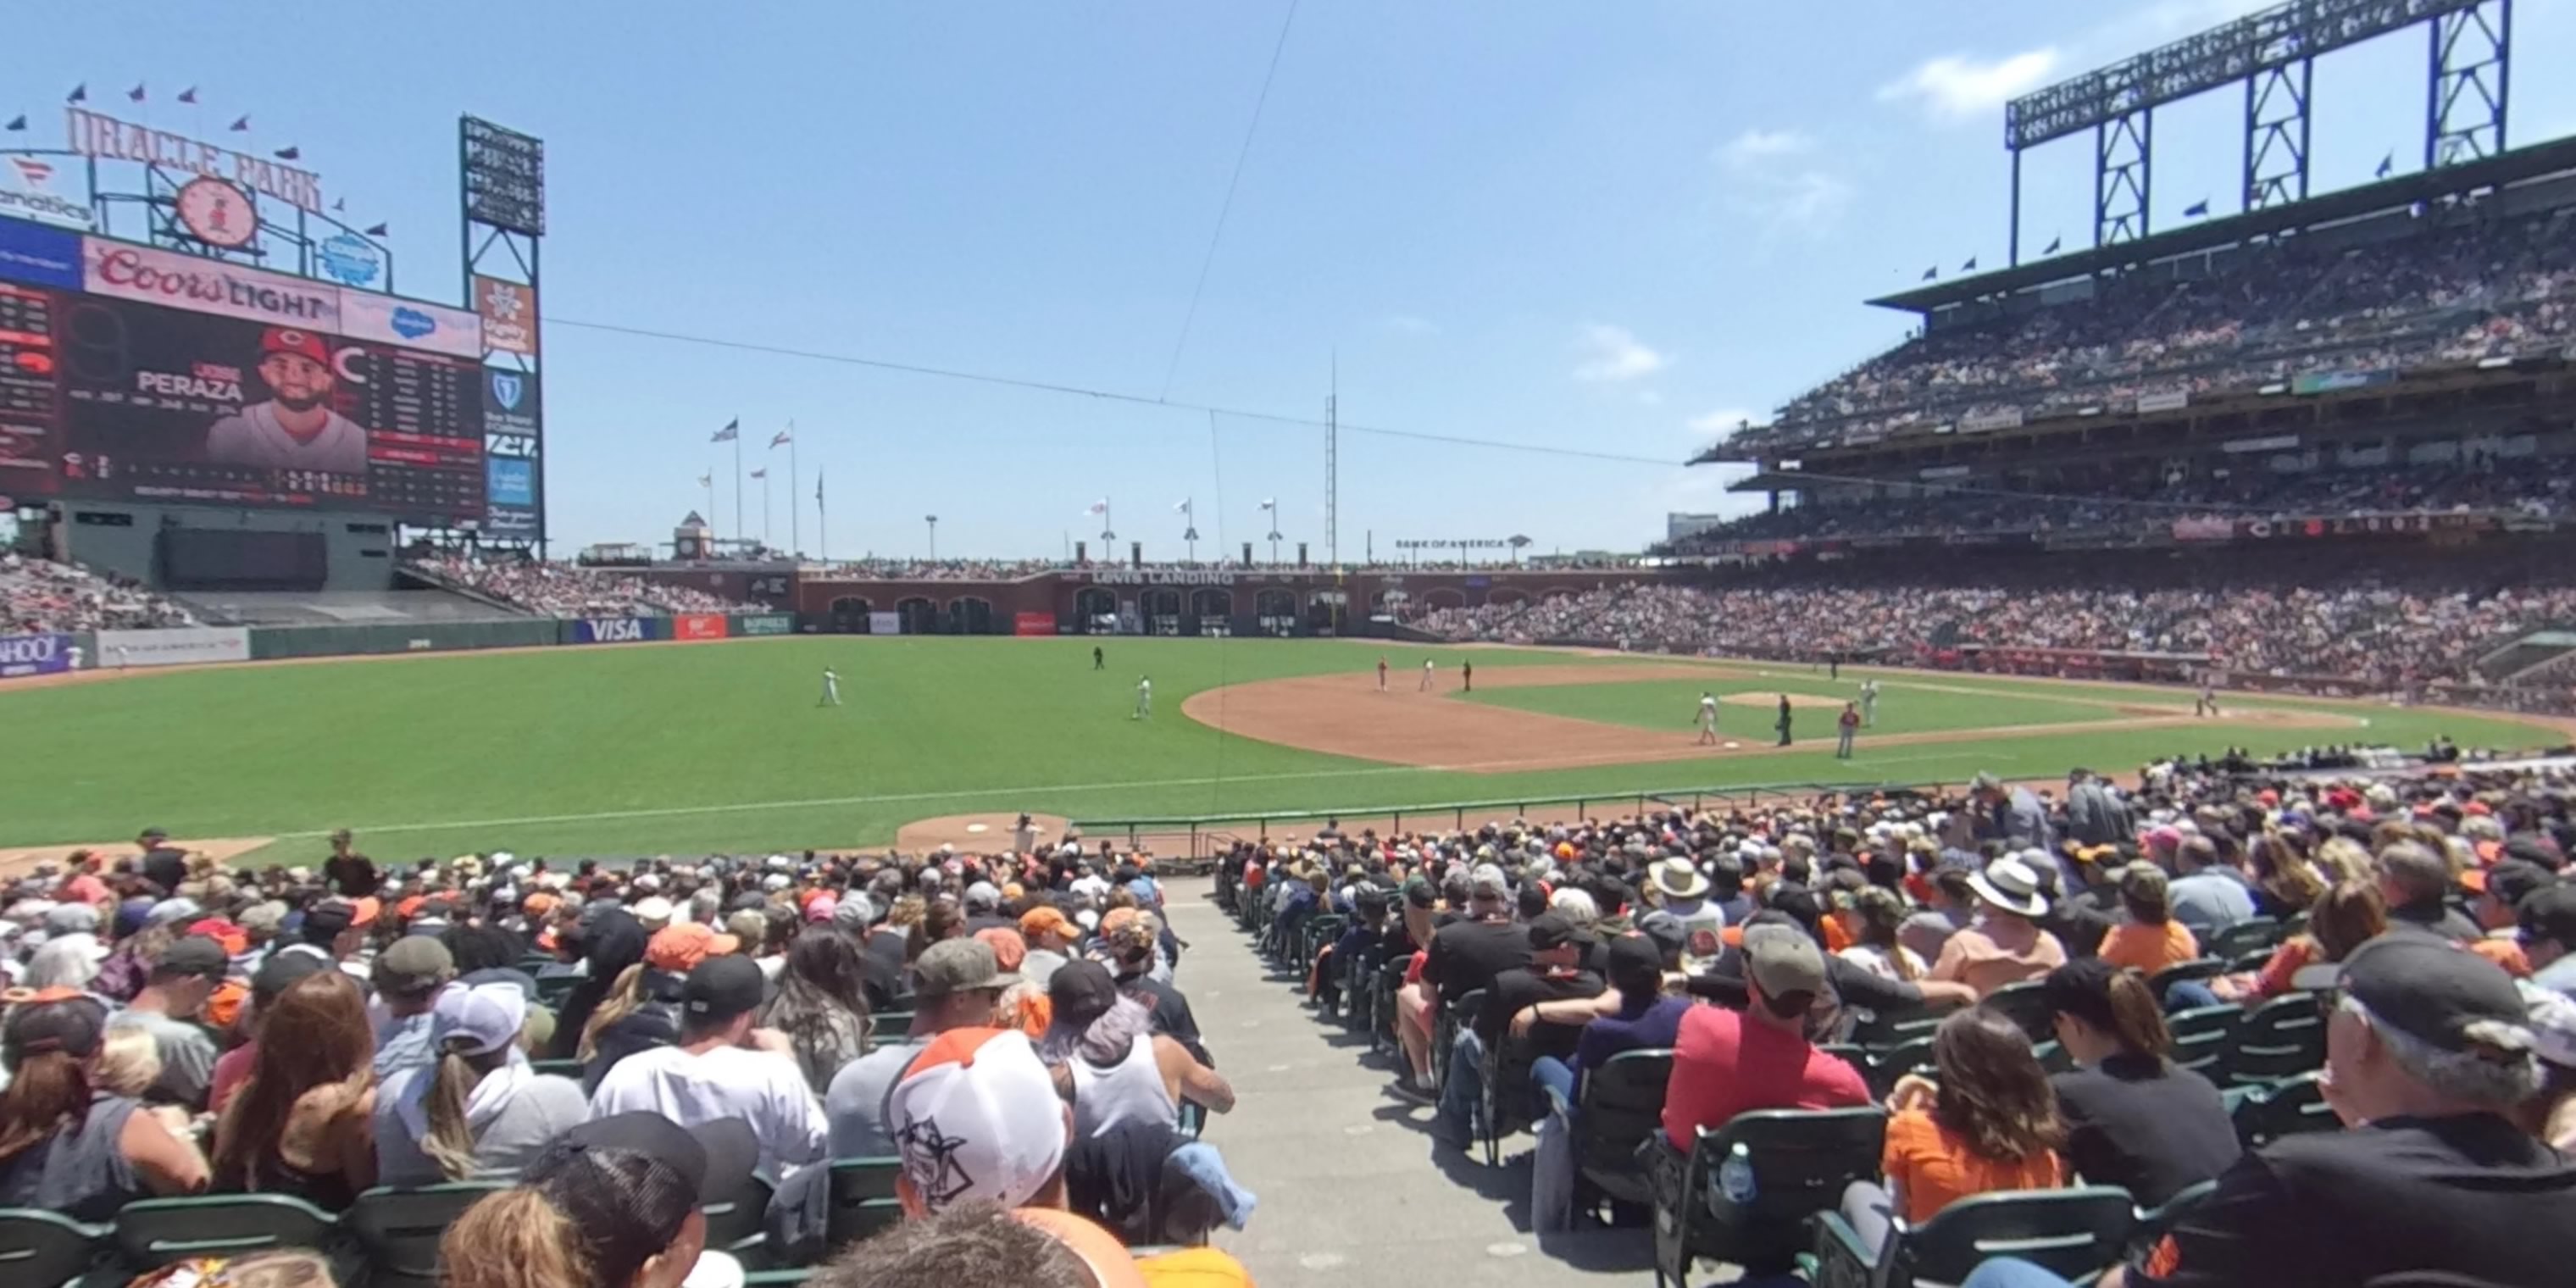 section 126 panoramic seat view  for baseball - oracle park